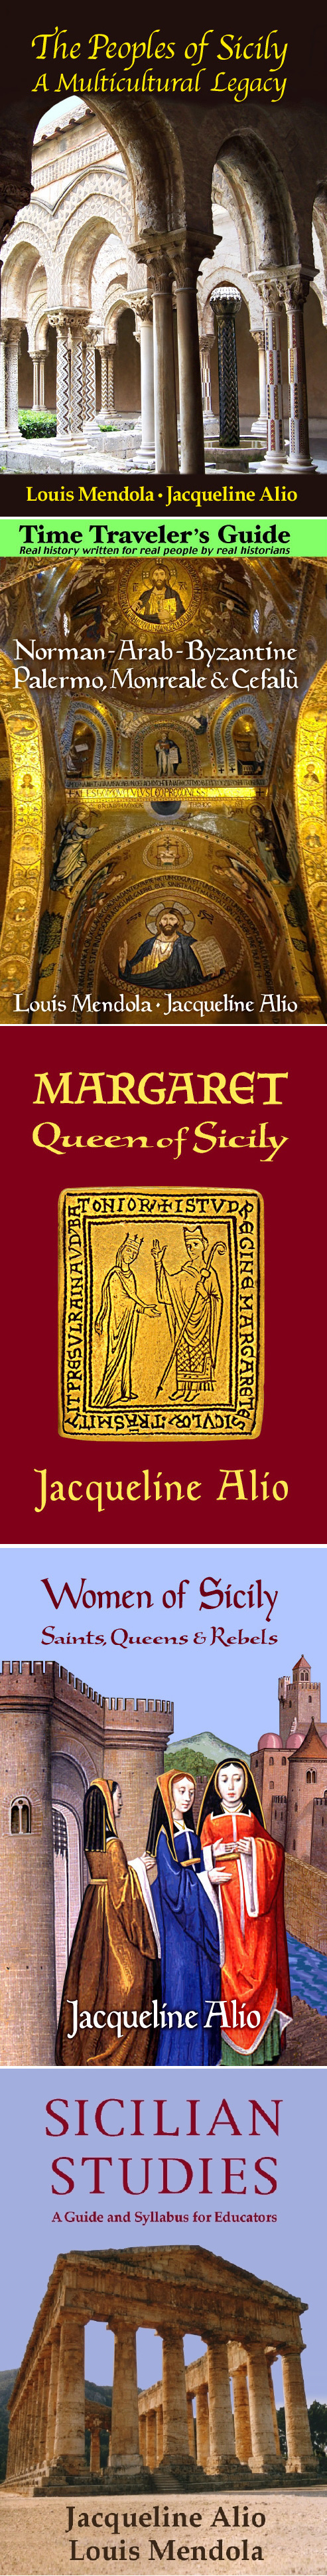 Books about Sicily.